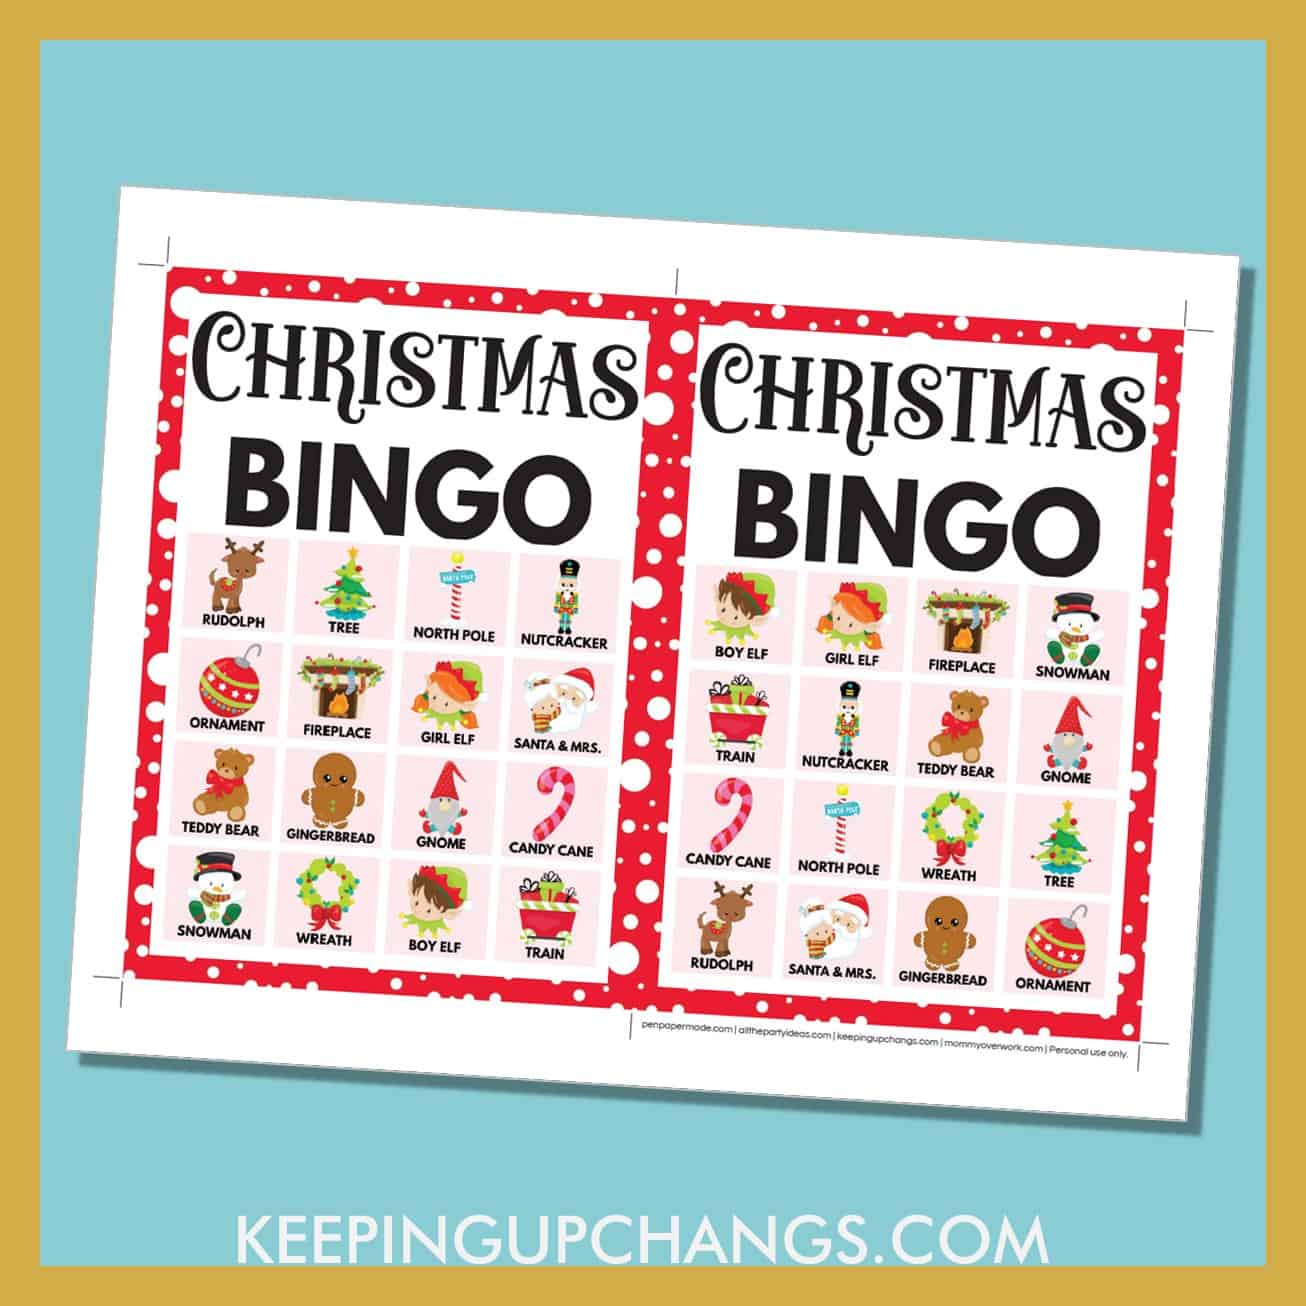 free christmas bingo card 4x4 5x7 game boards with images and text words.